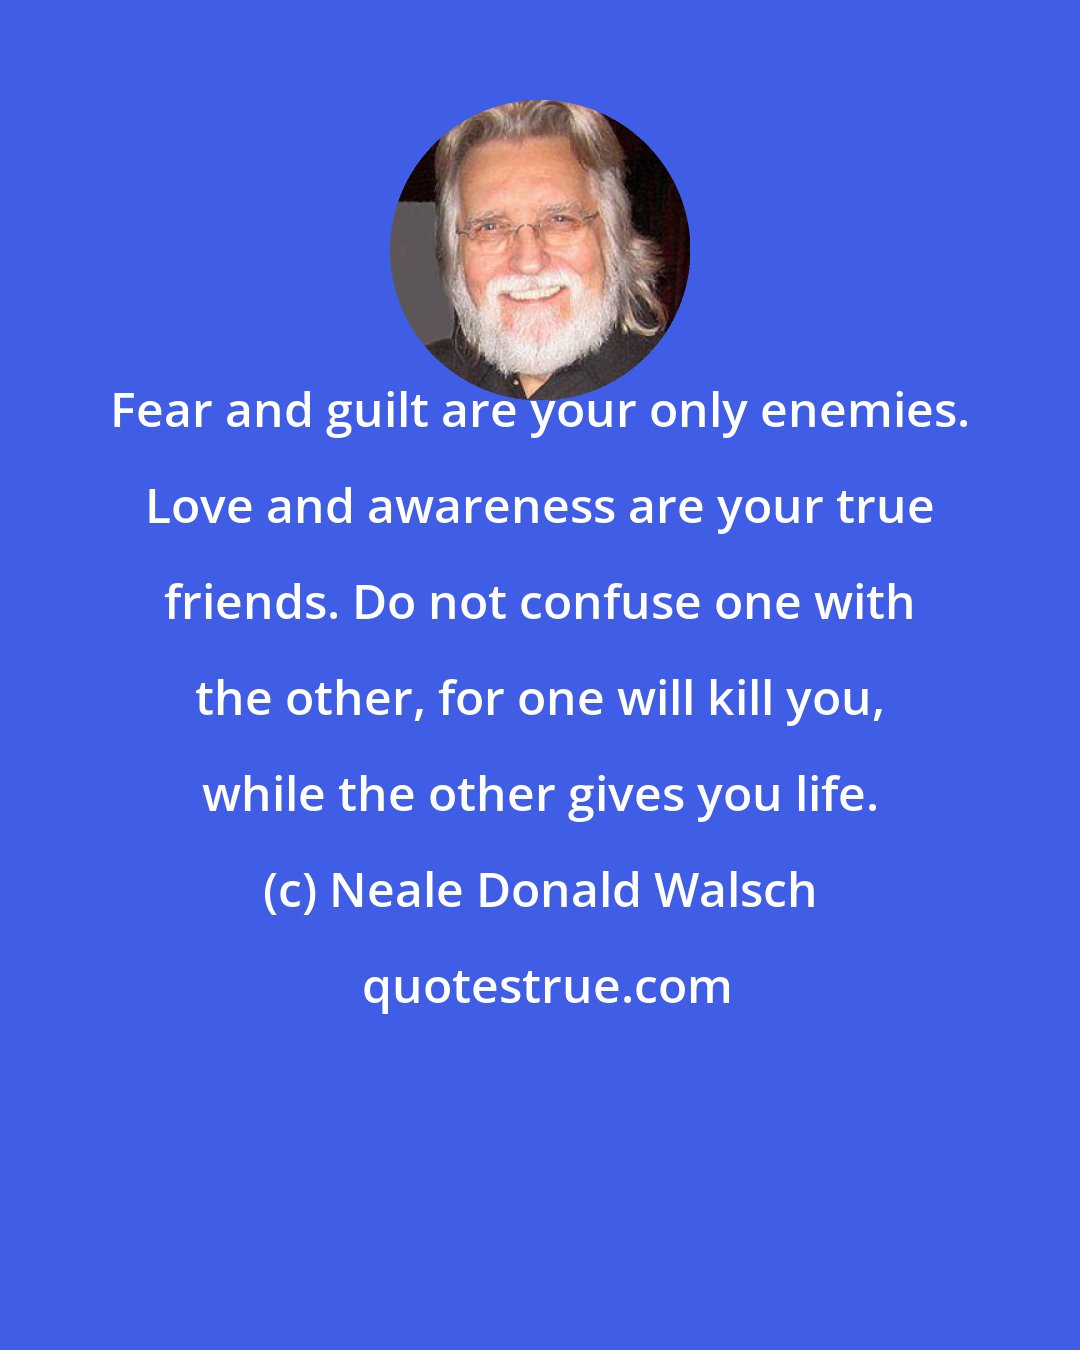 Neale Donald Walsch: Fear and guilt are your only enemies. Love and awareness are your true friends. Do not confuse one with the other, for one will kill you, while the other gives you life.